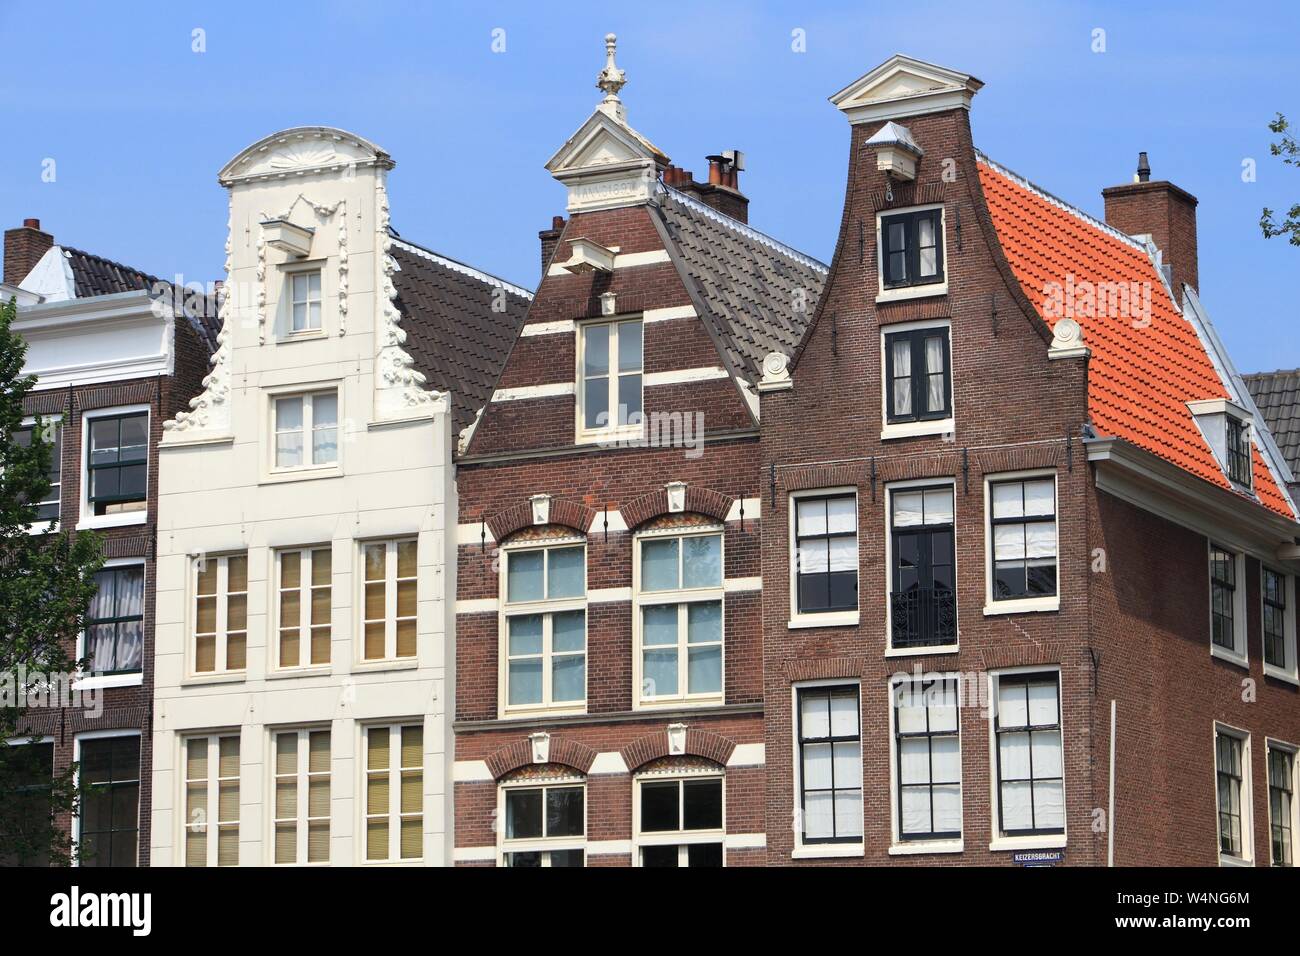 Amsterdam city architecture - Keizersgracht residential buildings. Netherlands rowhouse. Stock Photo